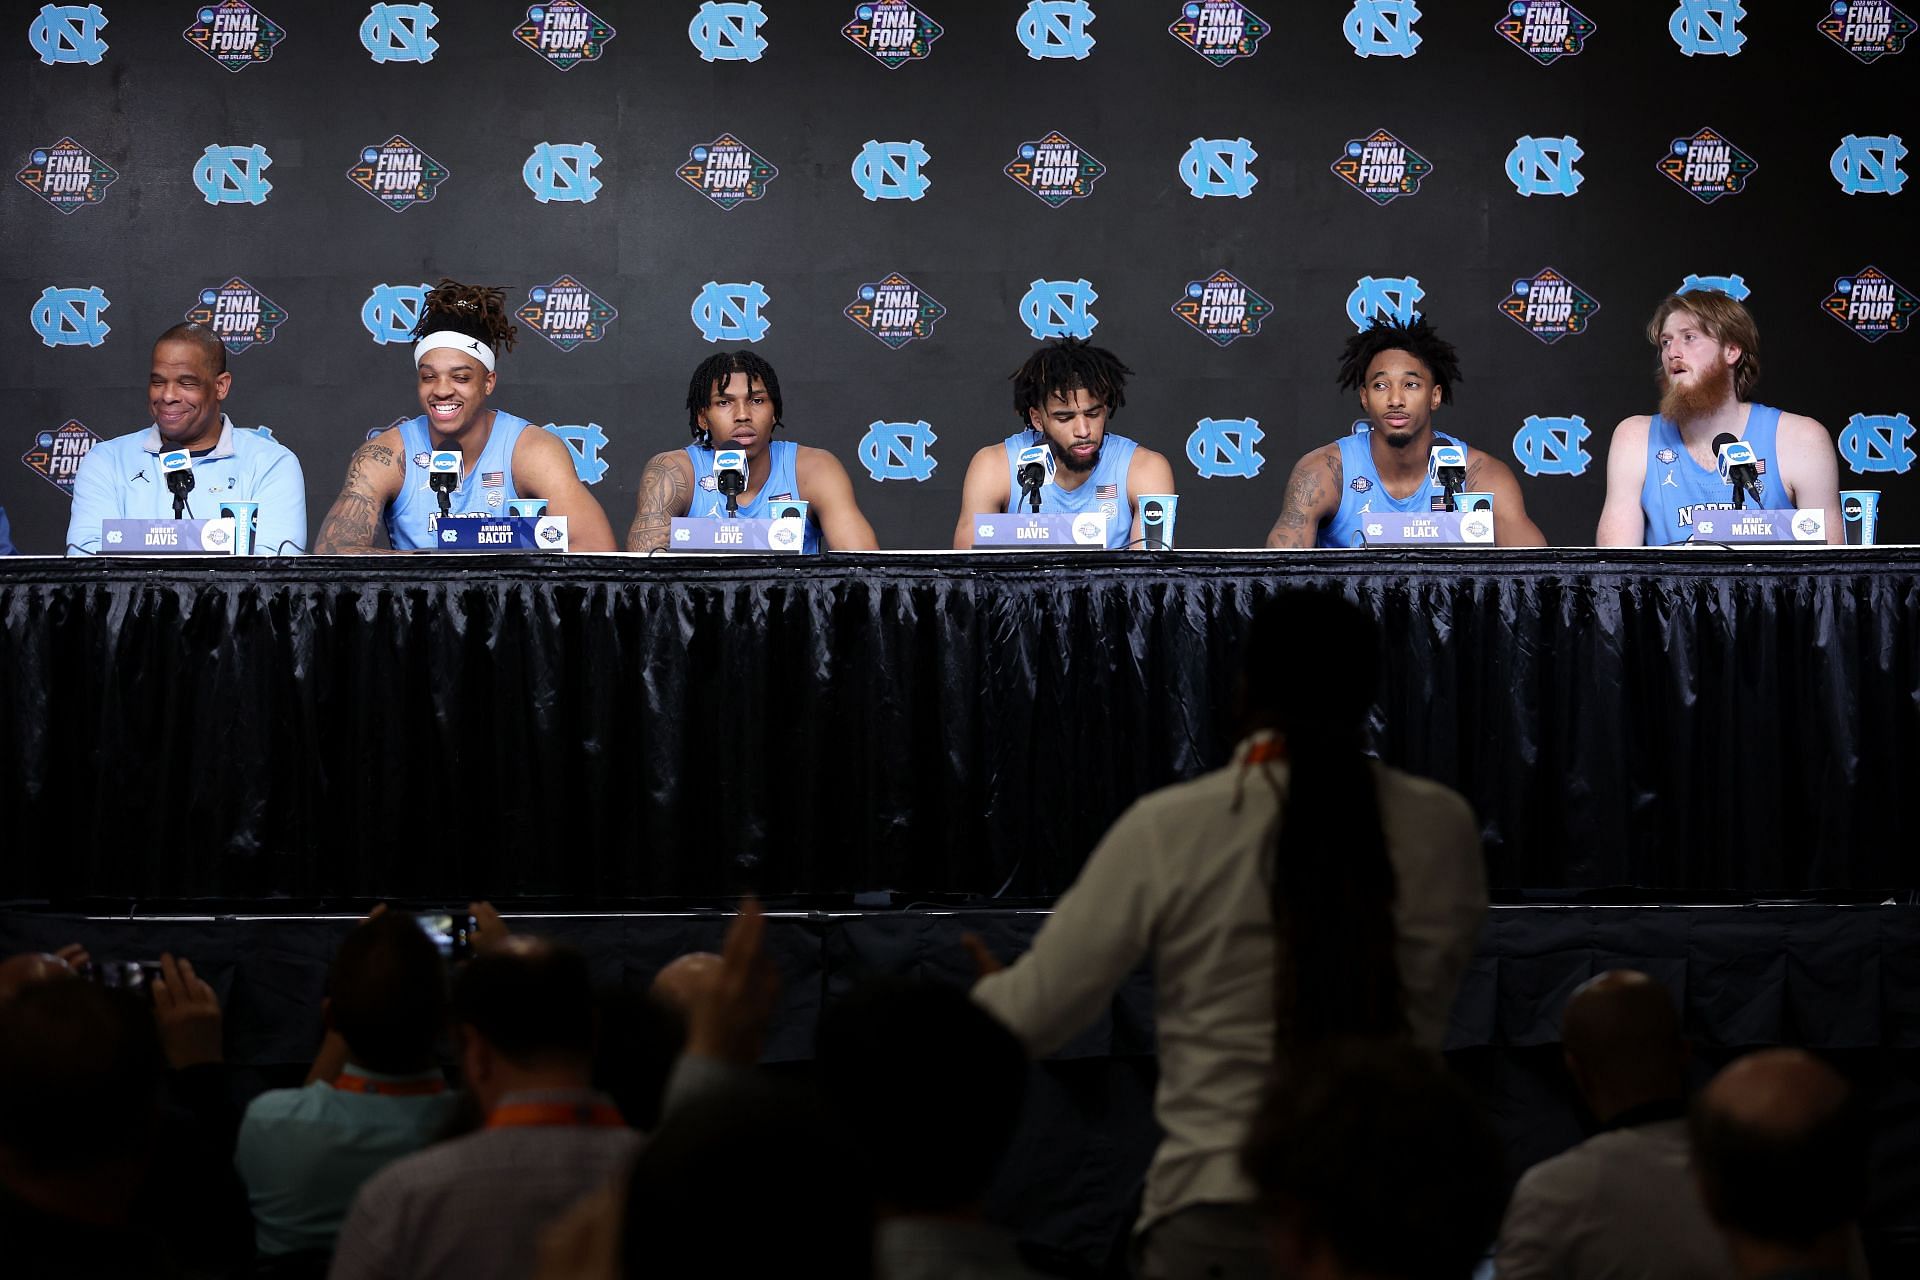 The stars of the North Carolina Tar Heels after their win.